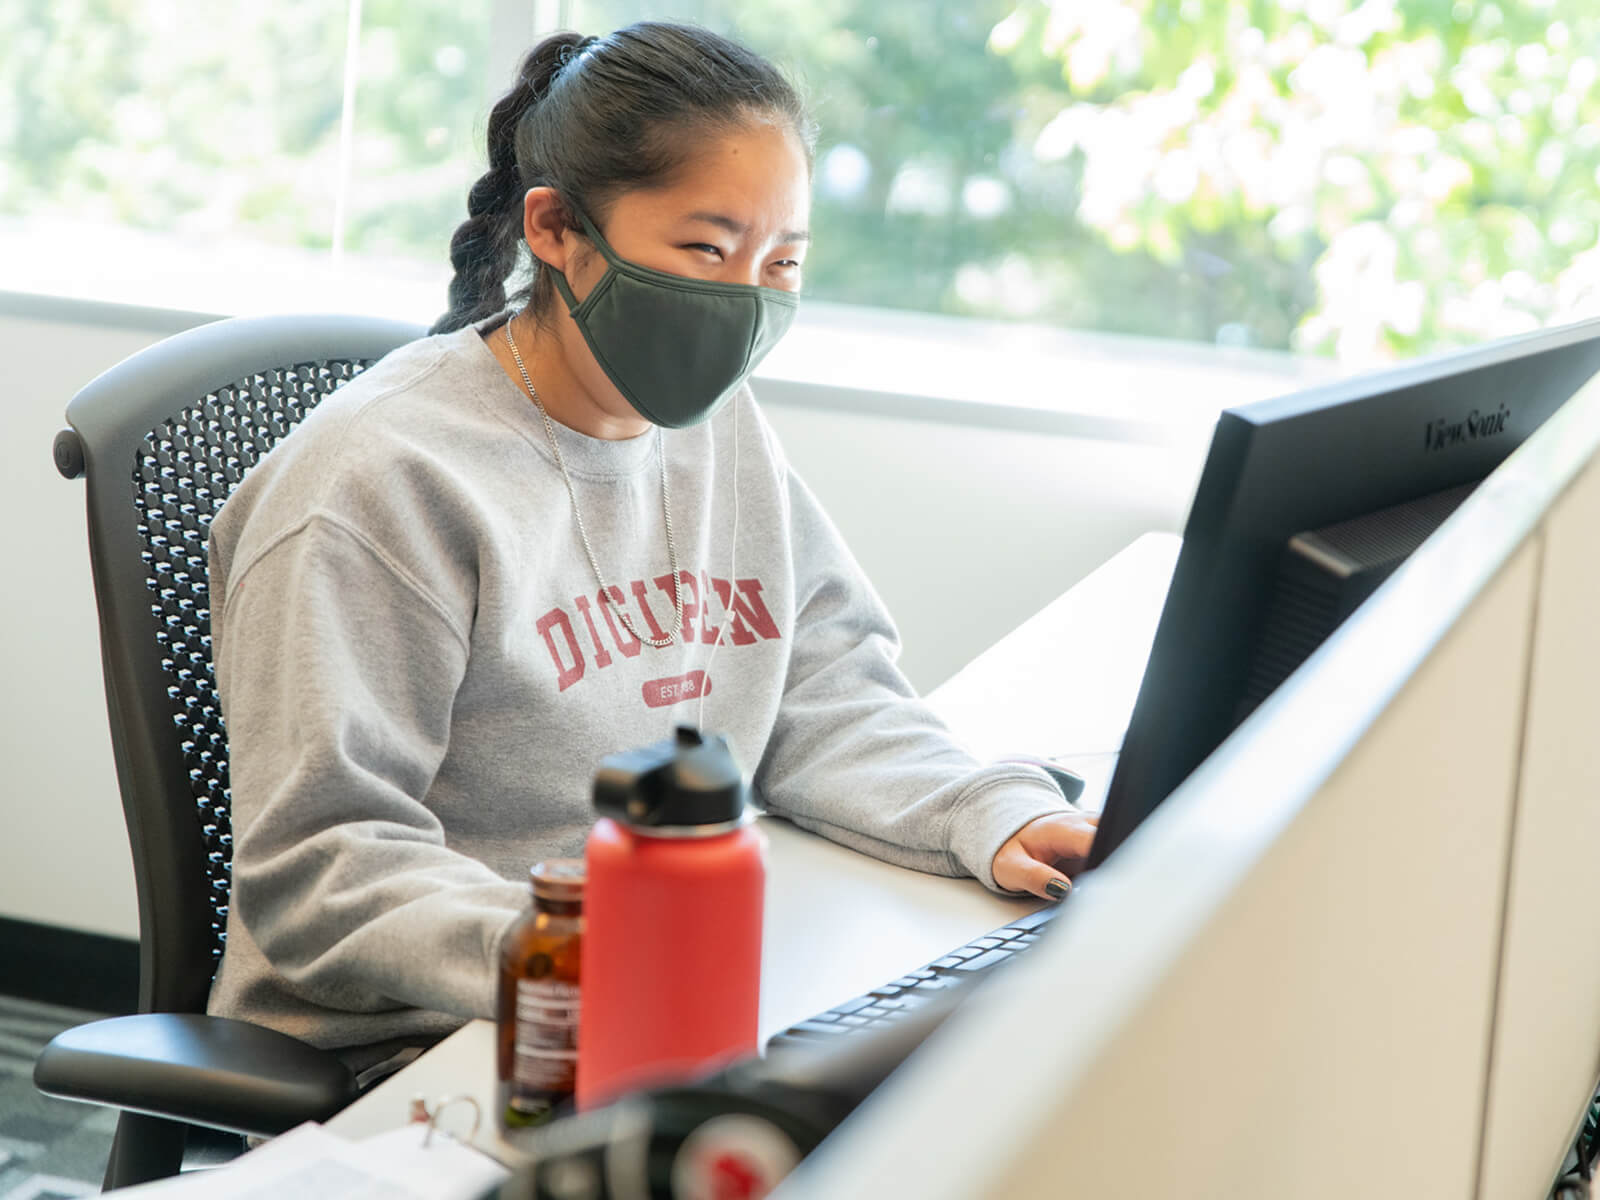 A student wearing a facemask and DigiPen sweatshirt sits in front of a computer screen.